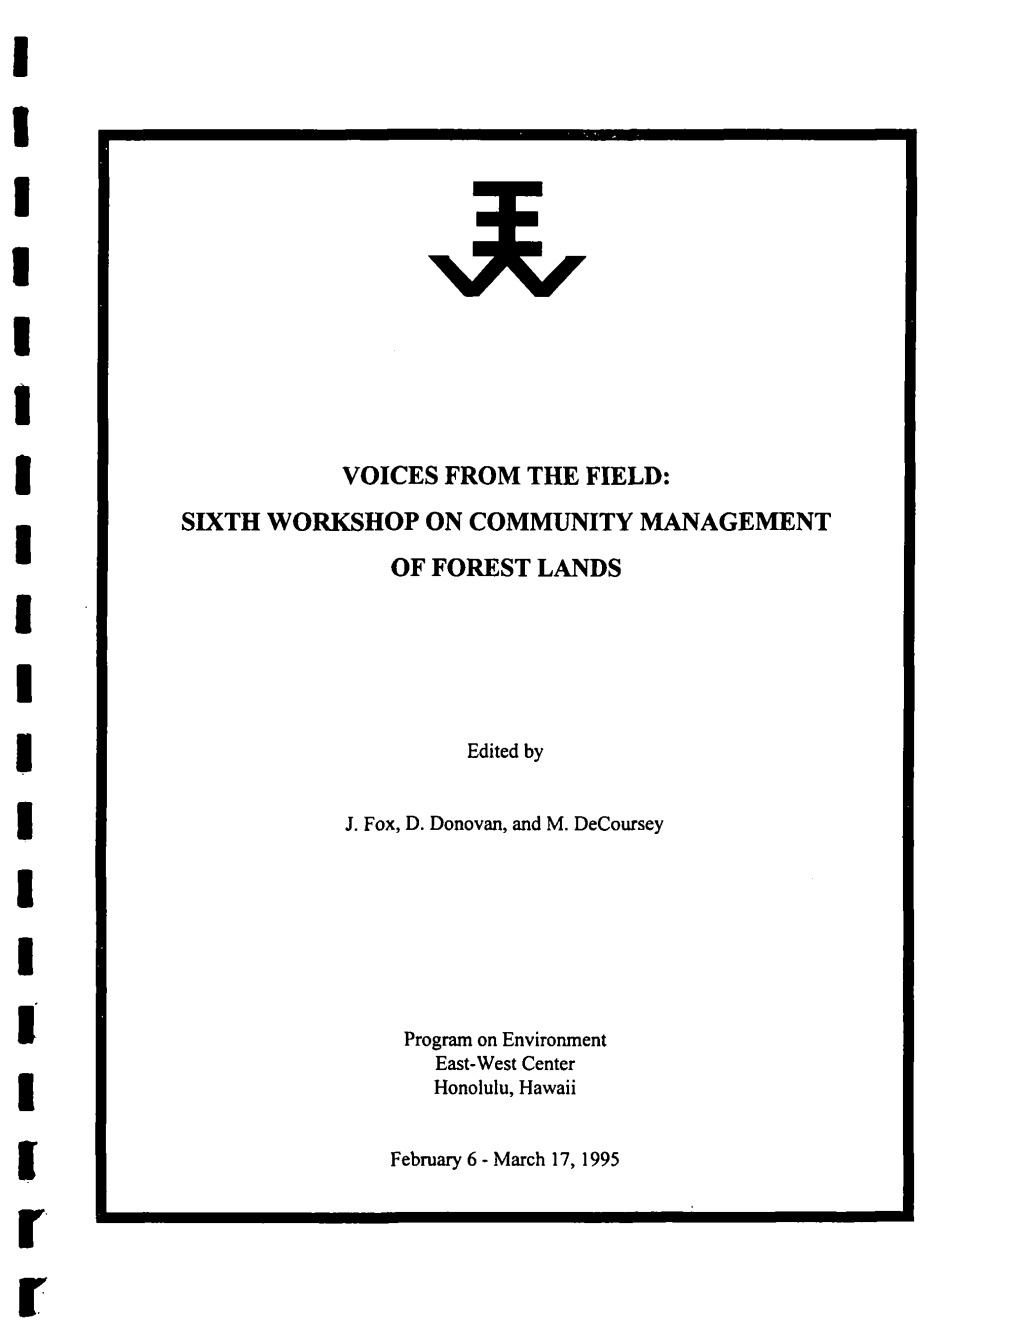 Voices from the Field : Sixth Workshop on Community Management of Forest Lands, February 6-March 17, 1995